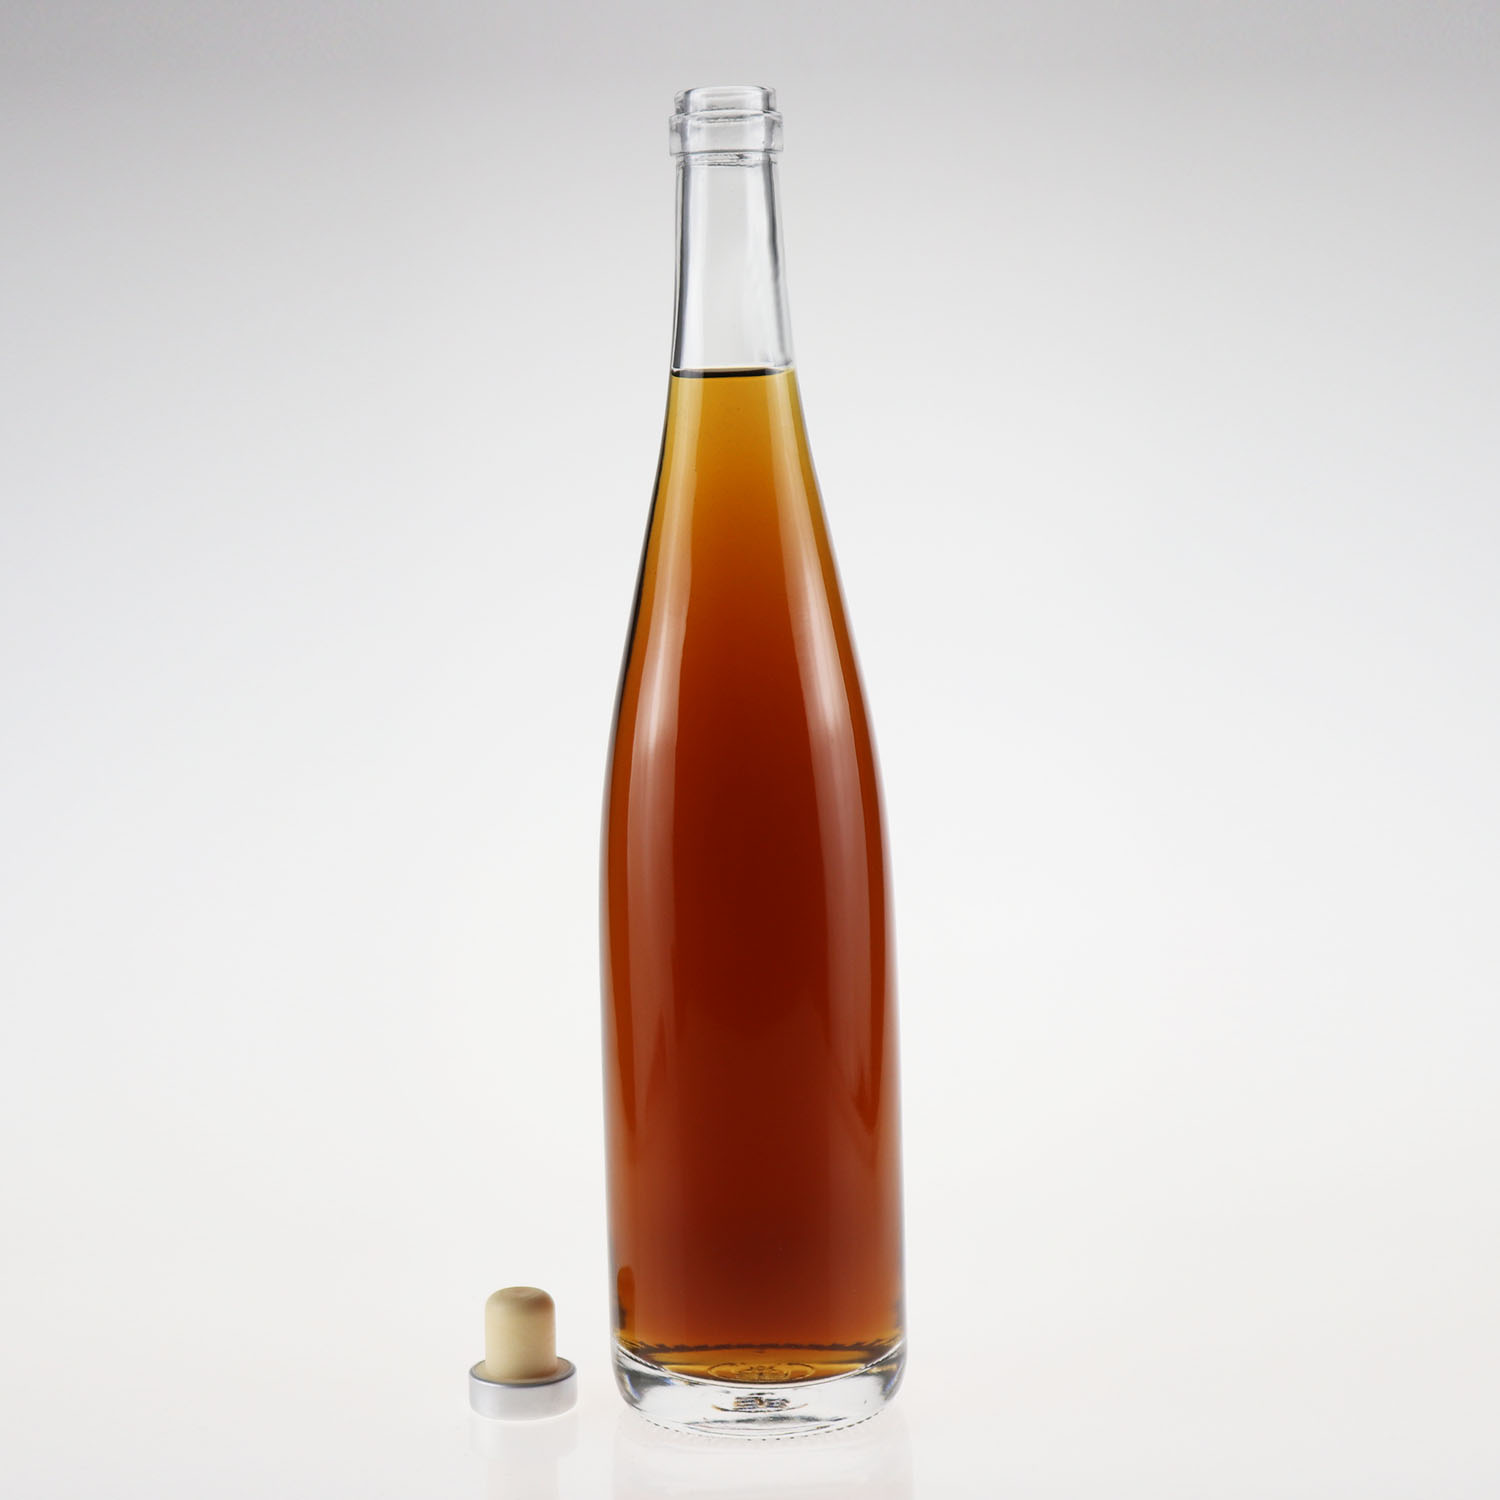 700ml round brandy whisky glass bottle with a cork top